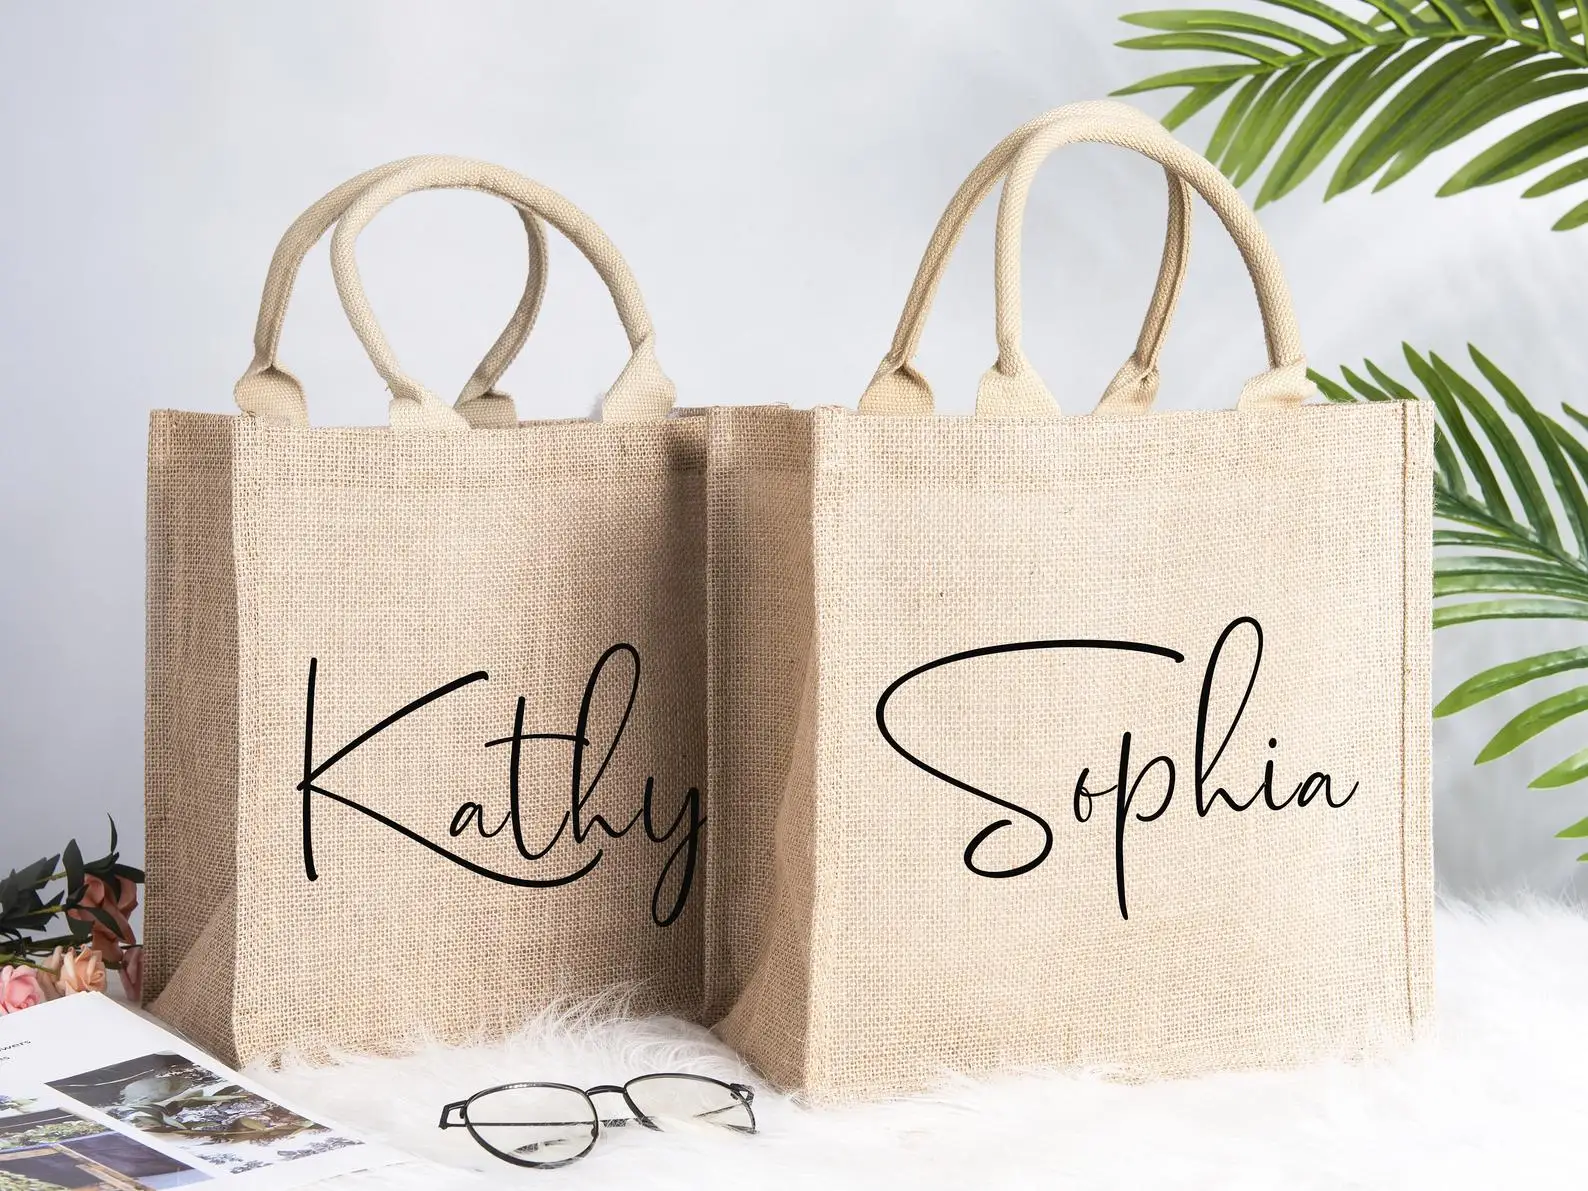 Custom Beach Tote Bag XL Carryall Tote for Bachelorette Weekend Getaway Beach Vibes Large Canvas Beach Bag Personalized Bridesmaid Gifts